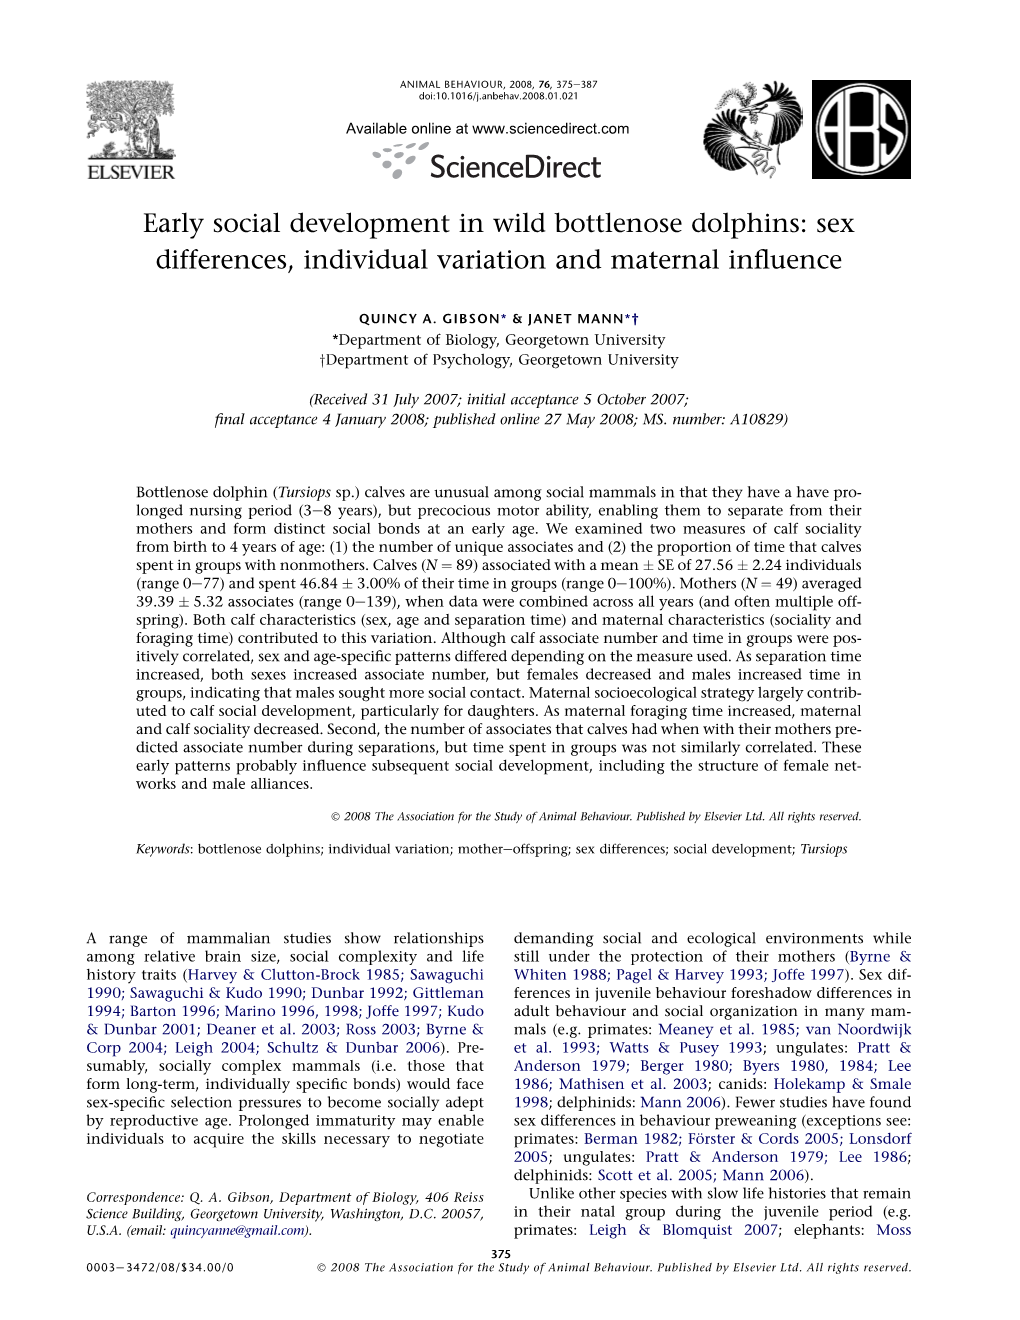 Early Social Development in Wild Bottlenose Dolphins: Sex Differences, Individual Variation and Maternal Inﬂuence